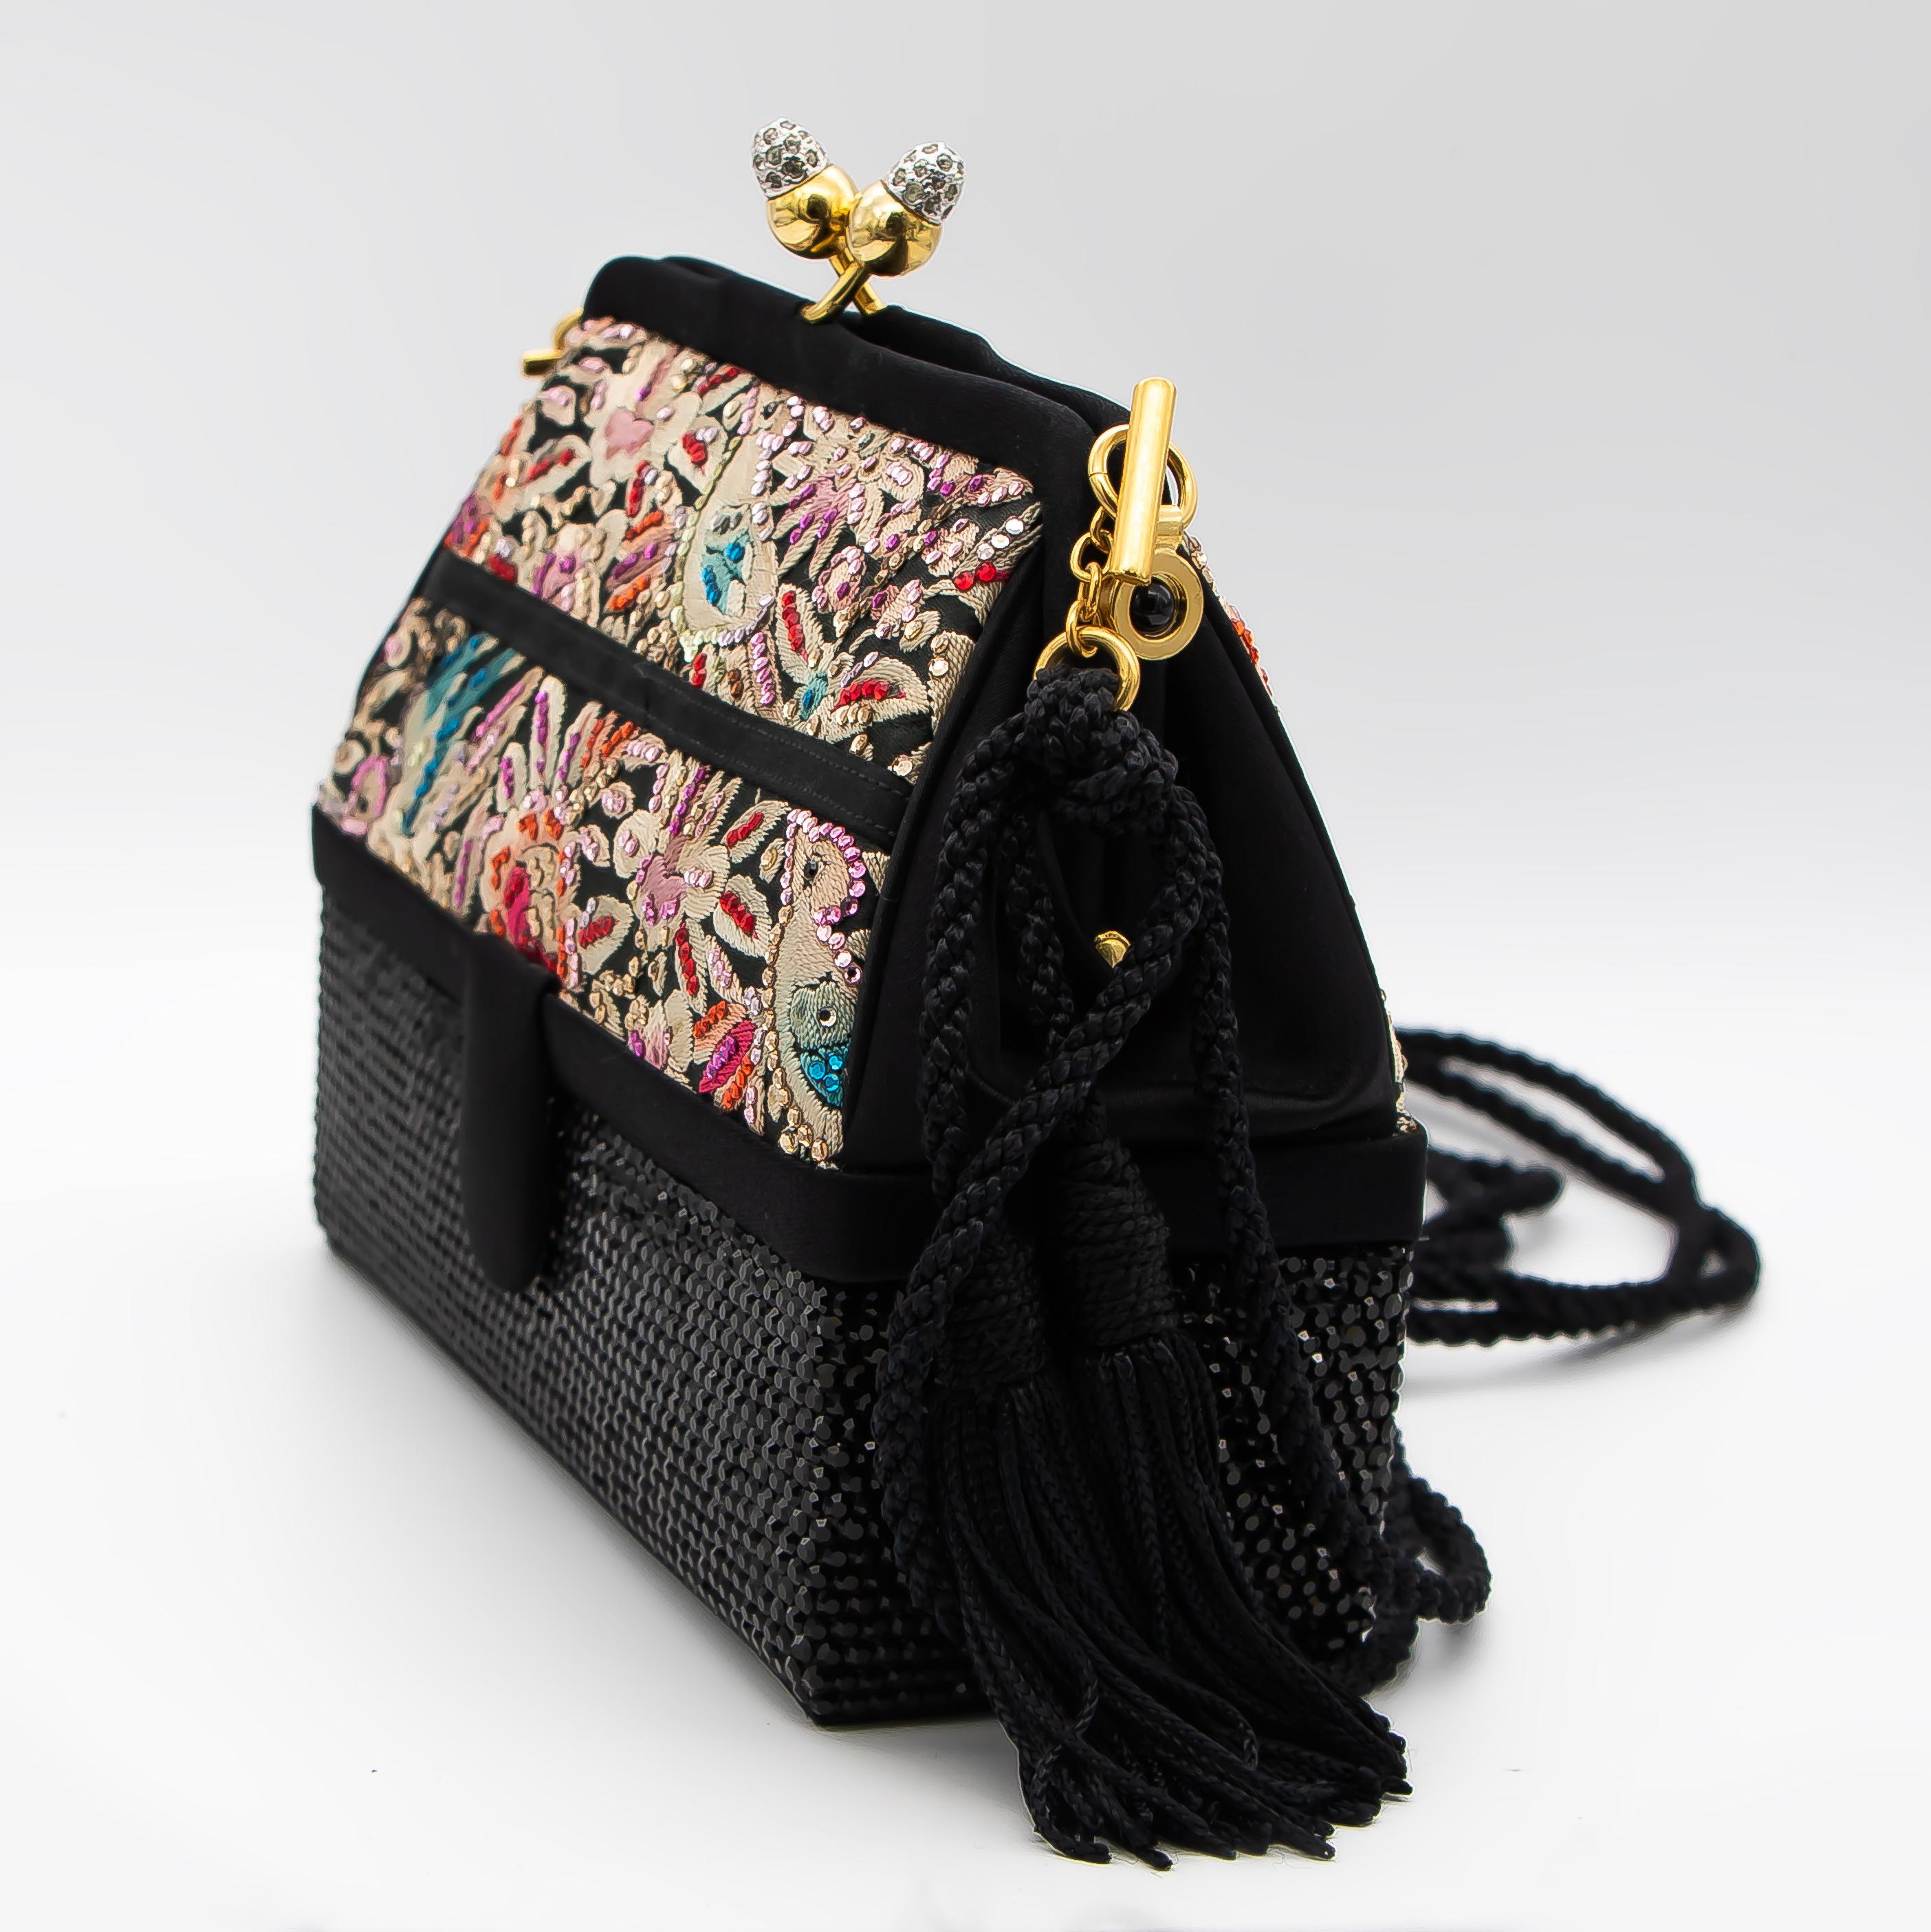 Black Judith Leiber Couture Collectible Multicolored Embroidered & Bedazzled Handbag